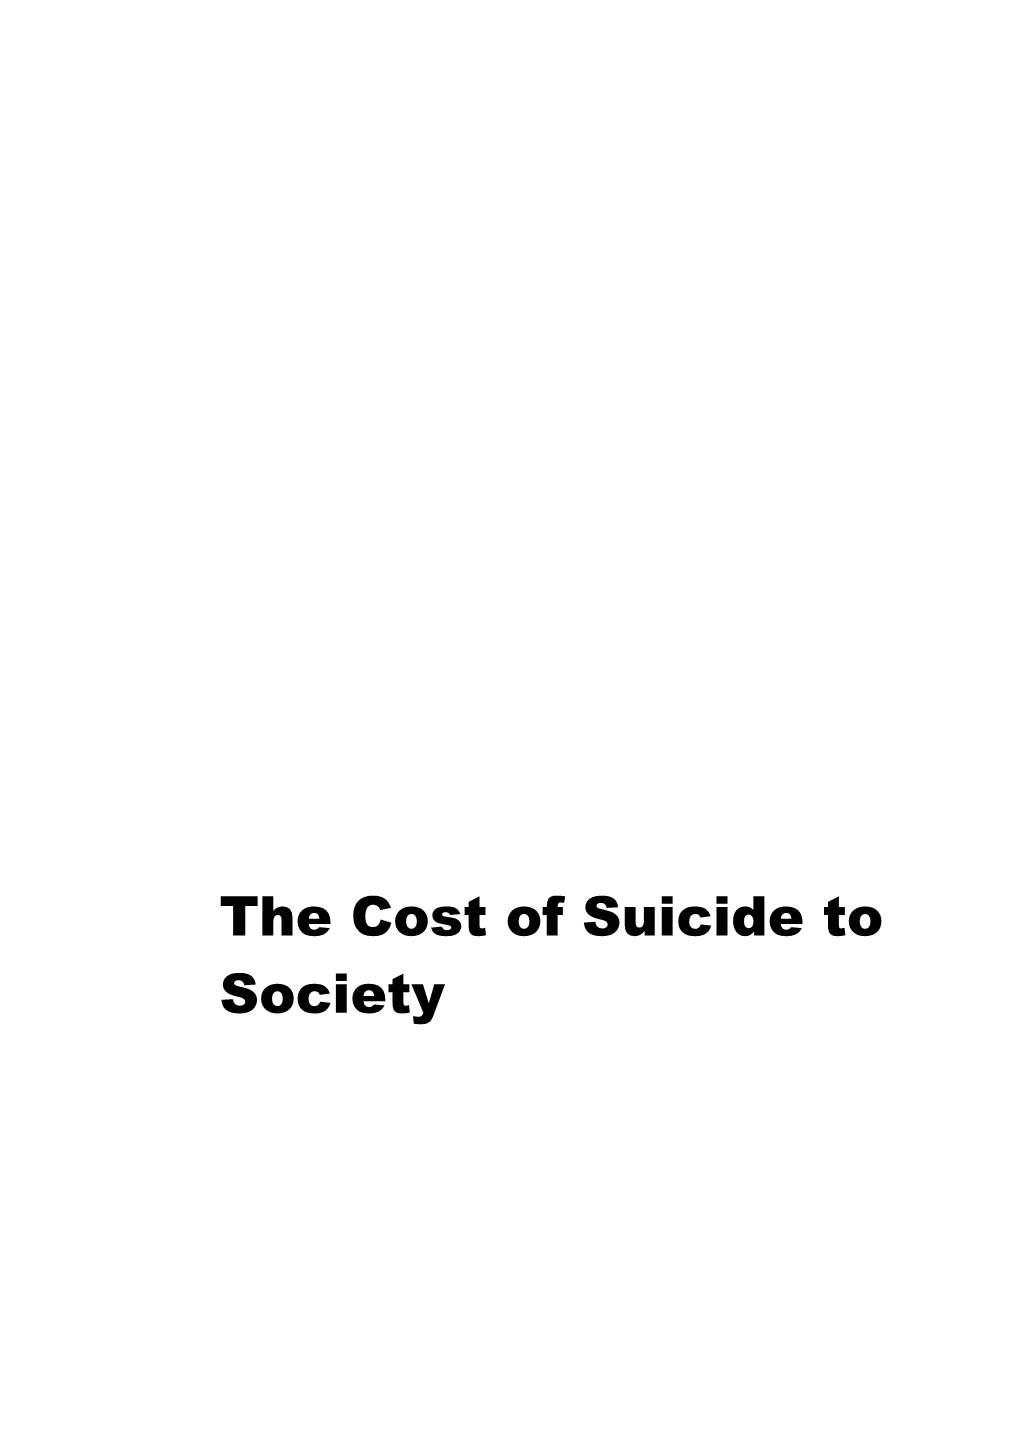 The Cost of Suicide to Society s1